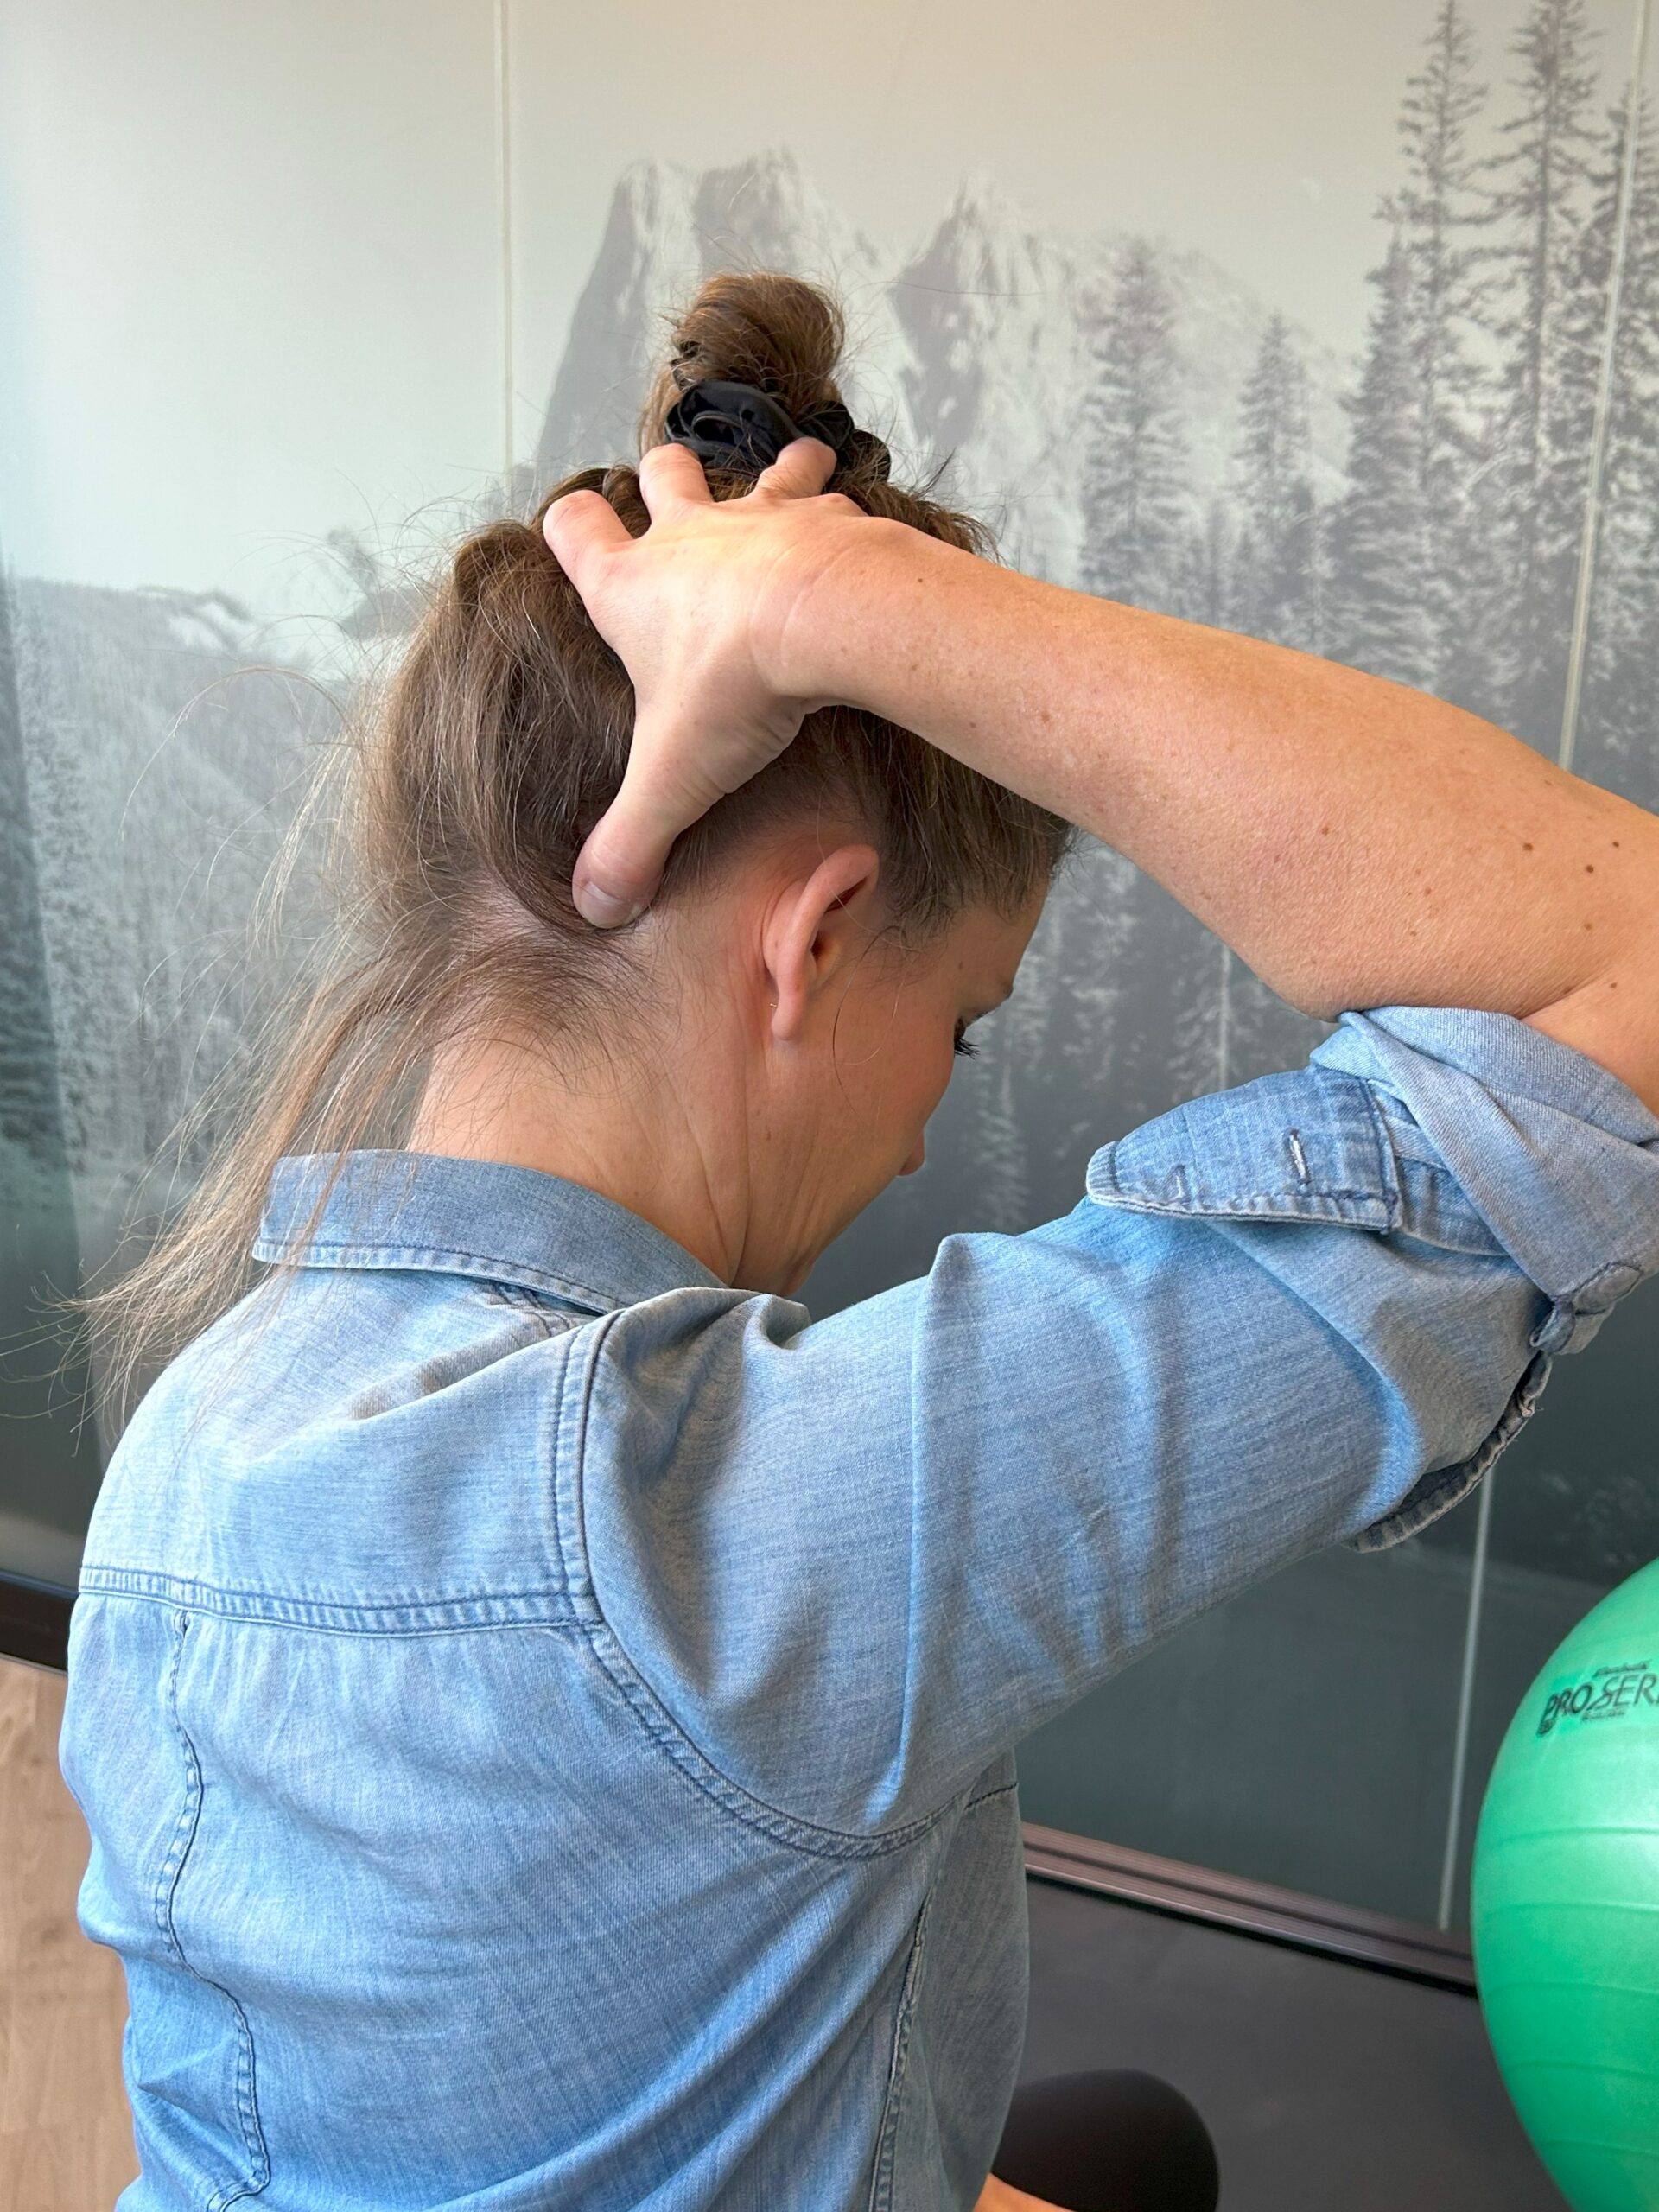 A lady demonstrating how to trigger a muscle release in the neck.